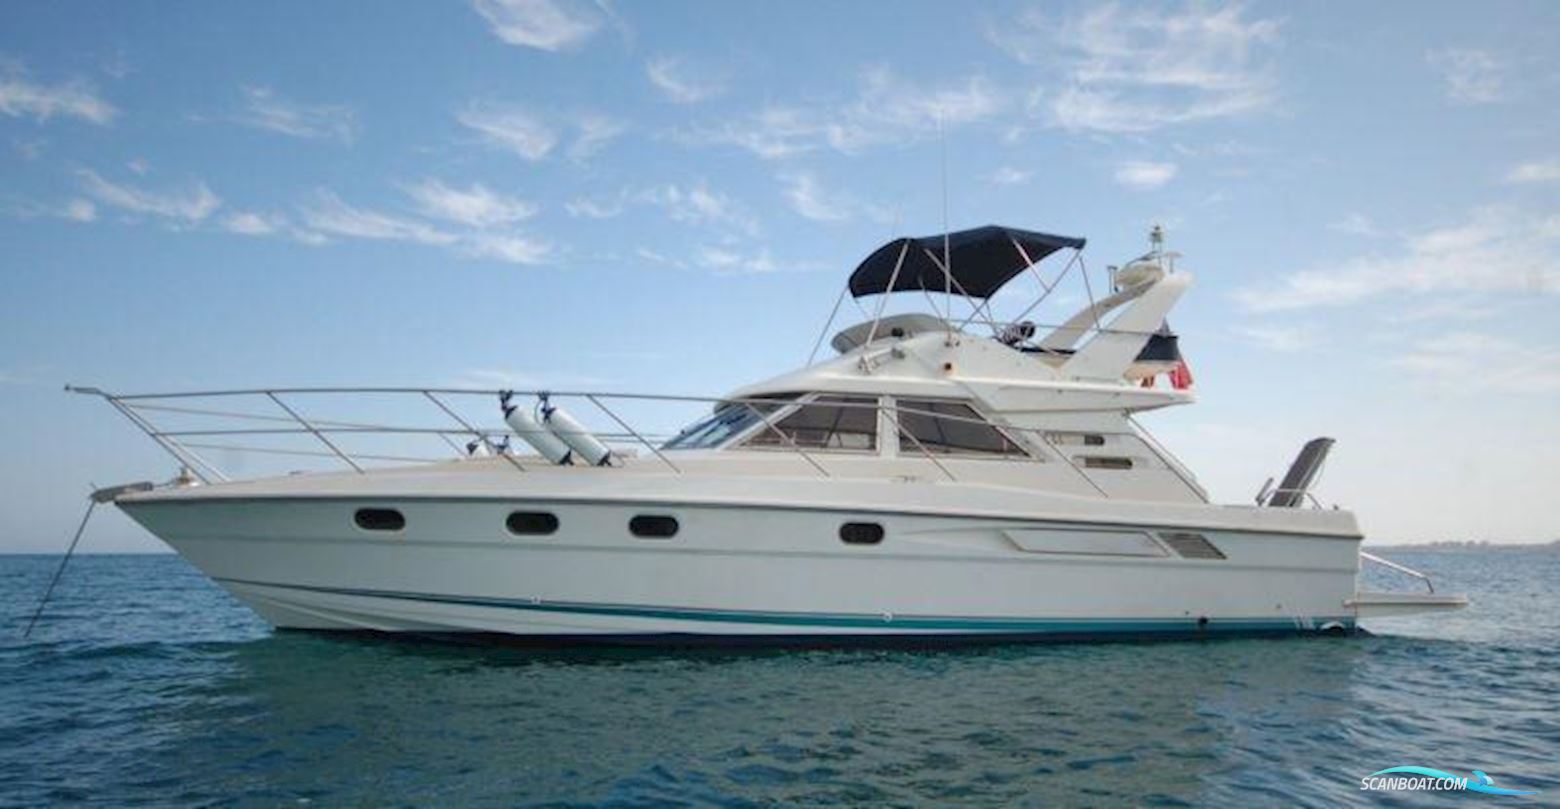 Fairline 43 Fly Motor boat 1989, with Volvo Penta 2 x 480 HP - Tamd 74 Edc engine, Italy